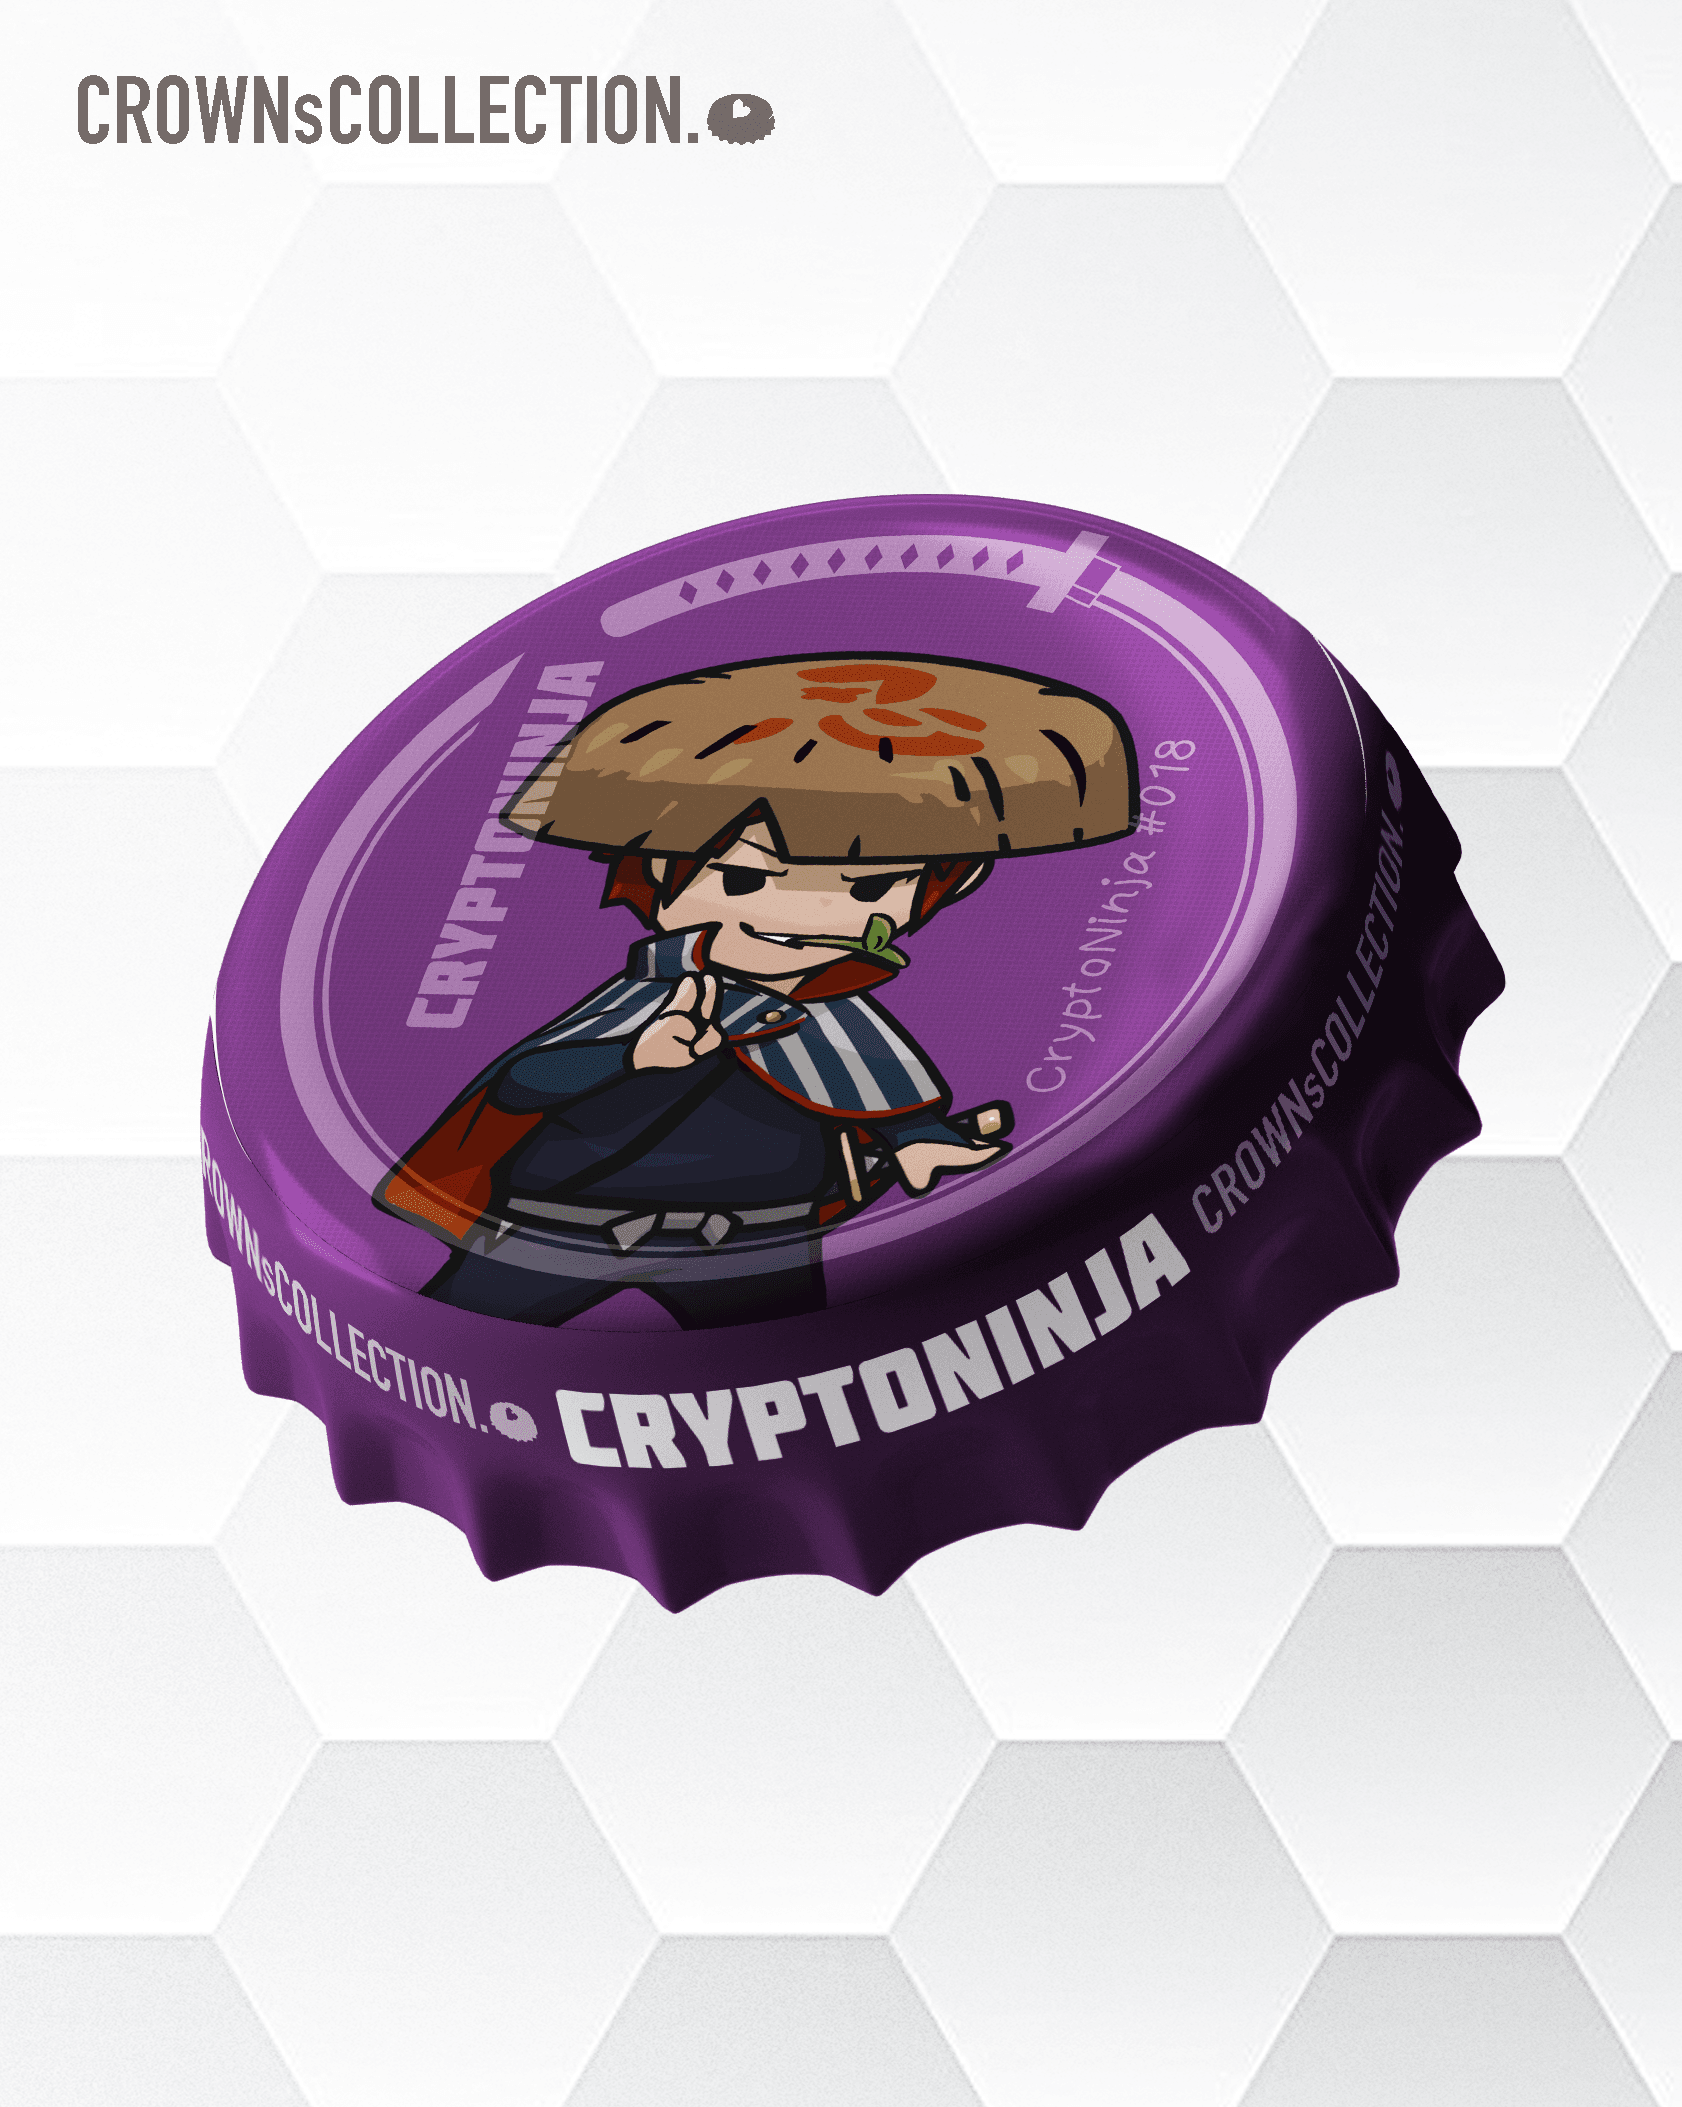 【CROWNsCOLLECTION.】CryptoNinja Crowns #018